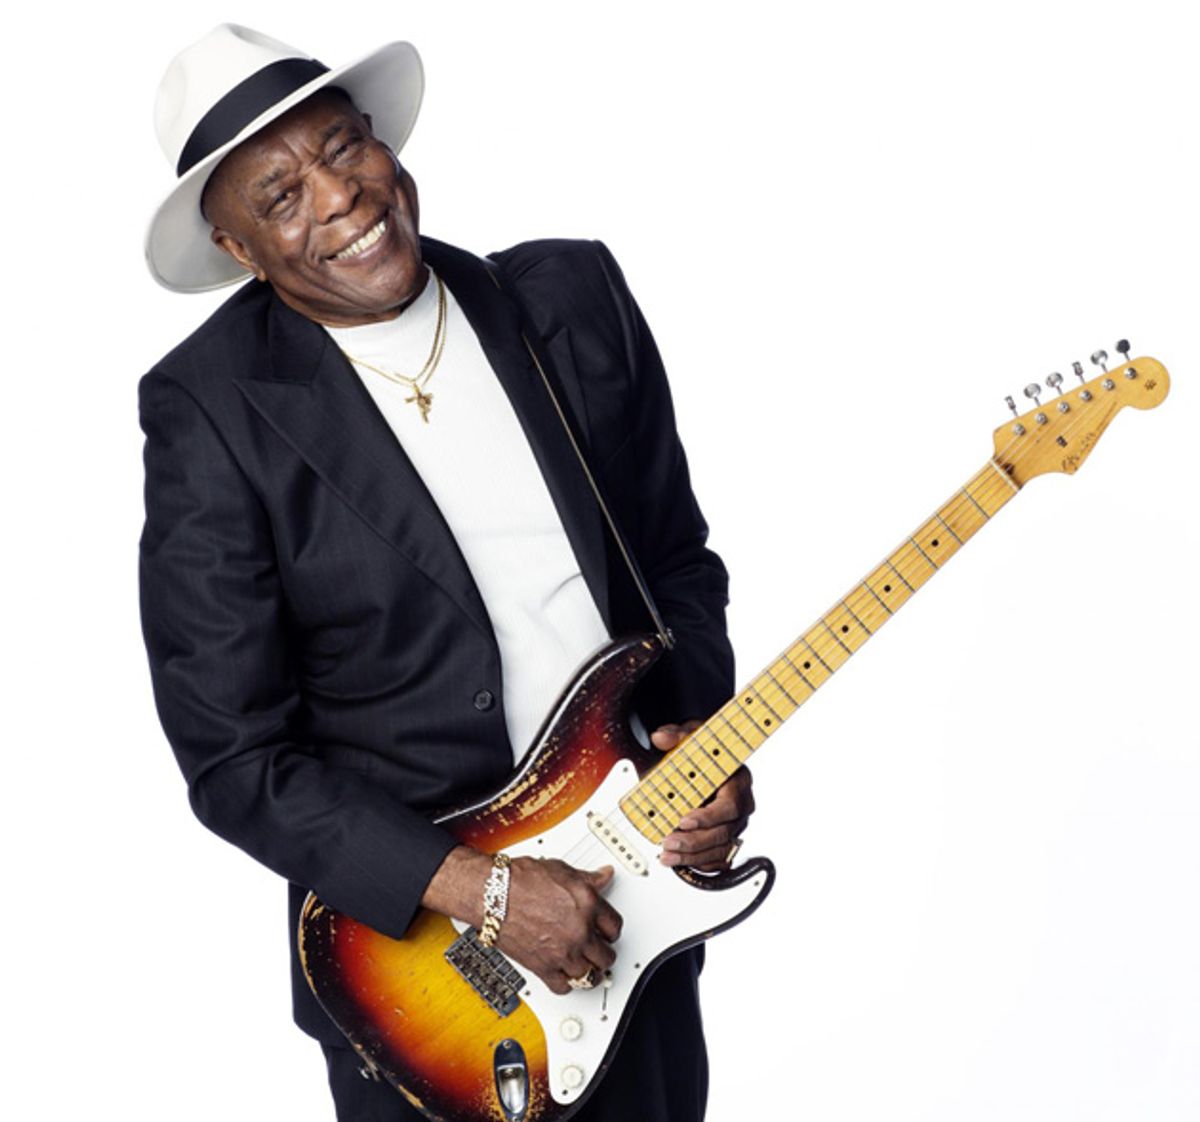 Buddy Guy’s Rhythm and Blues, Old and New